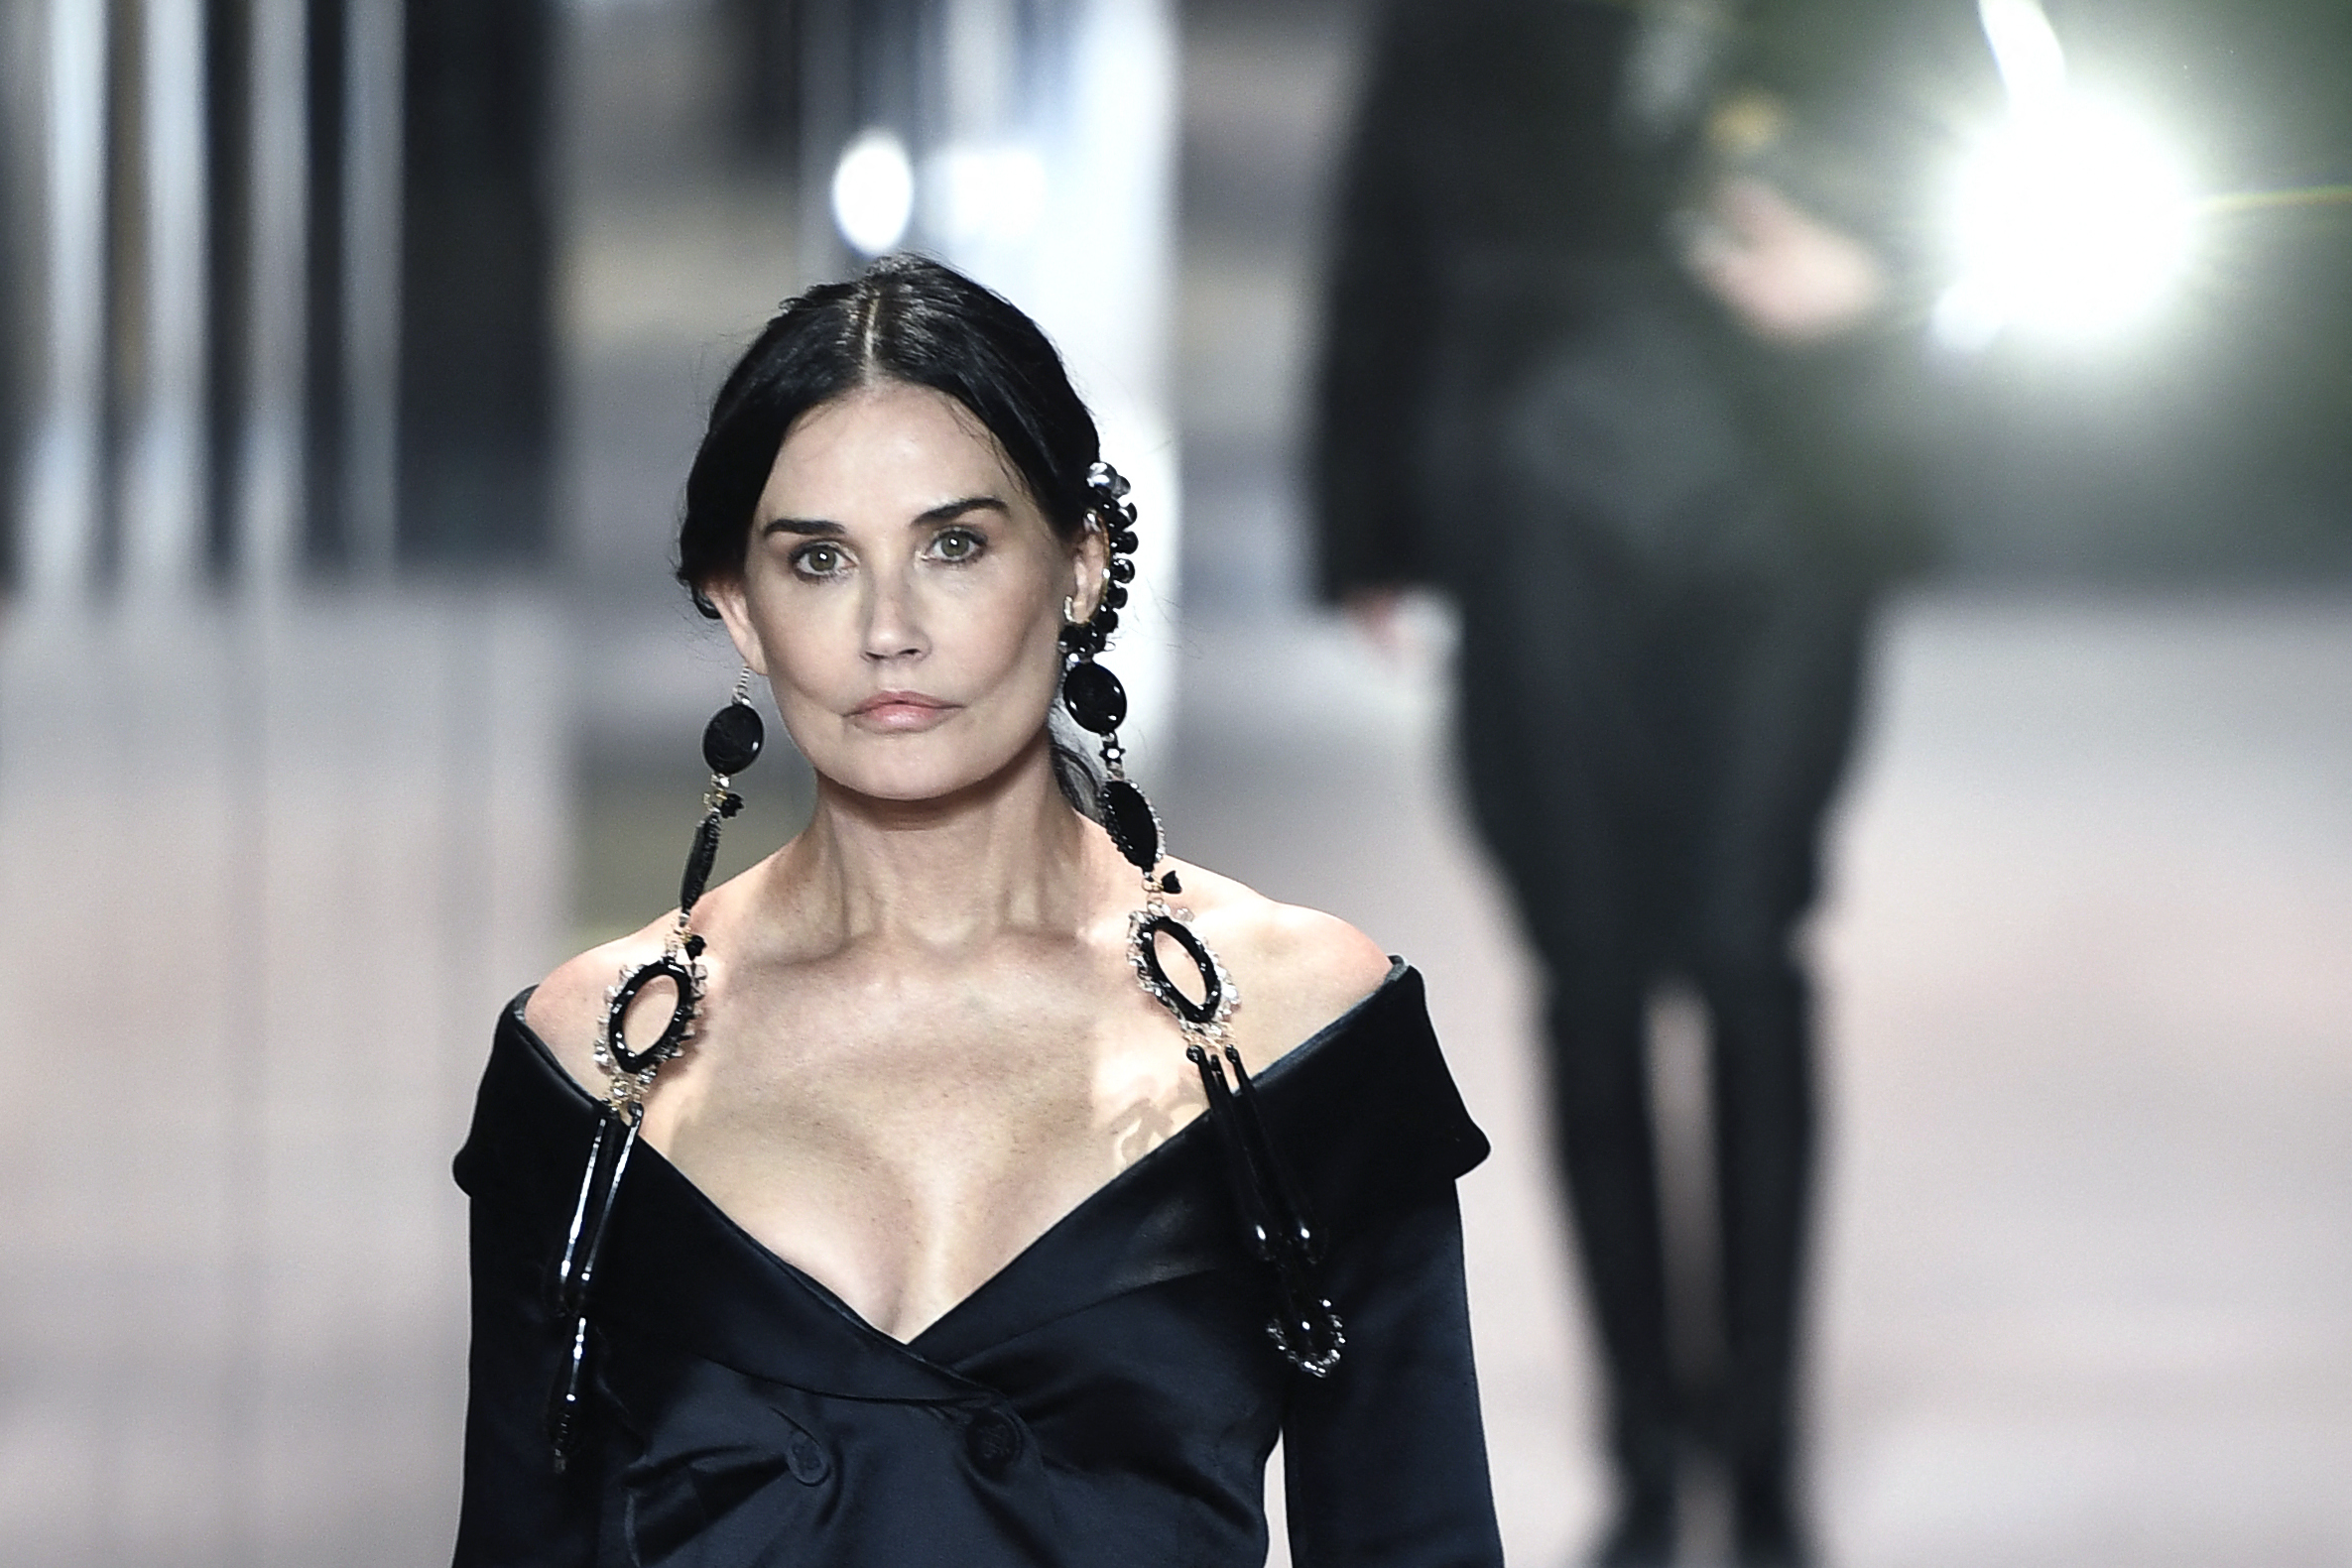 Demi Moore walking in the Fendi Haute Couture Fashion Show in Paris, 2021 | Source: Getty Images